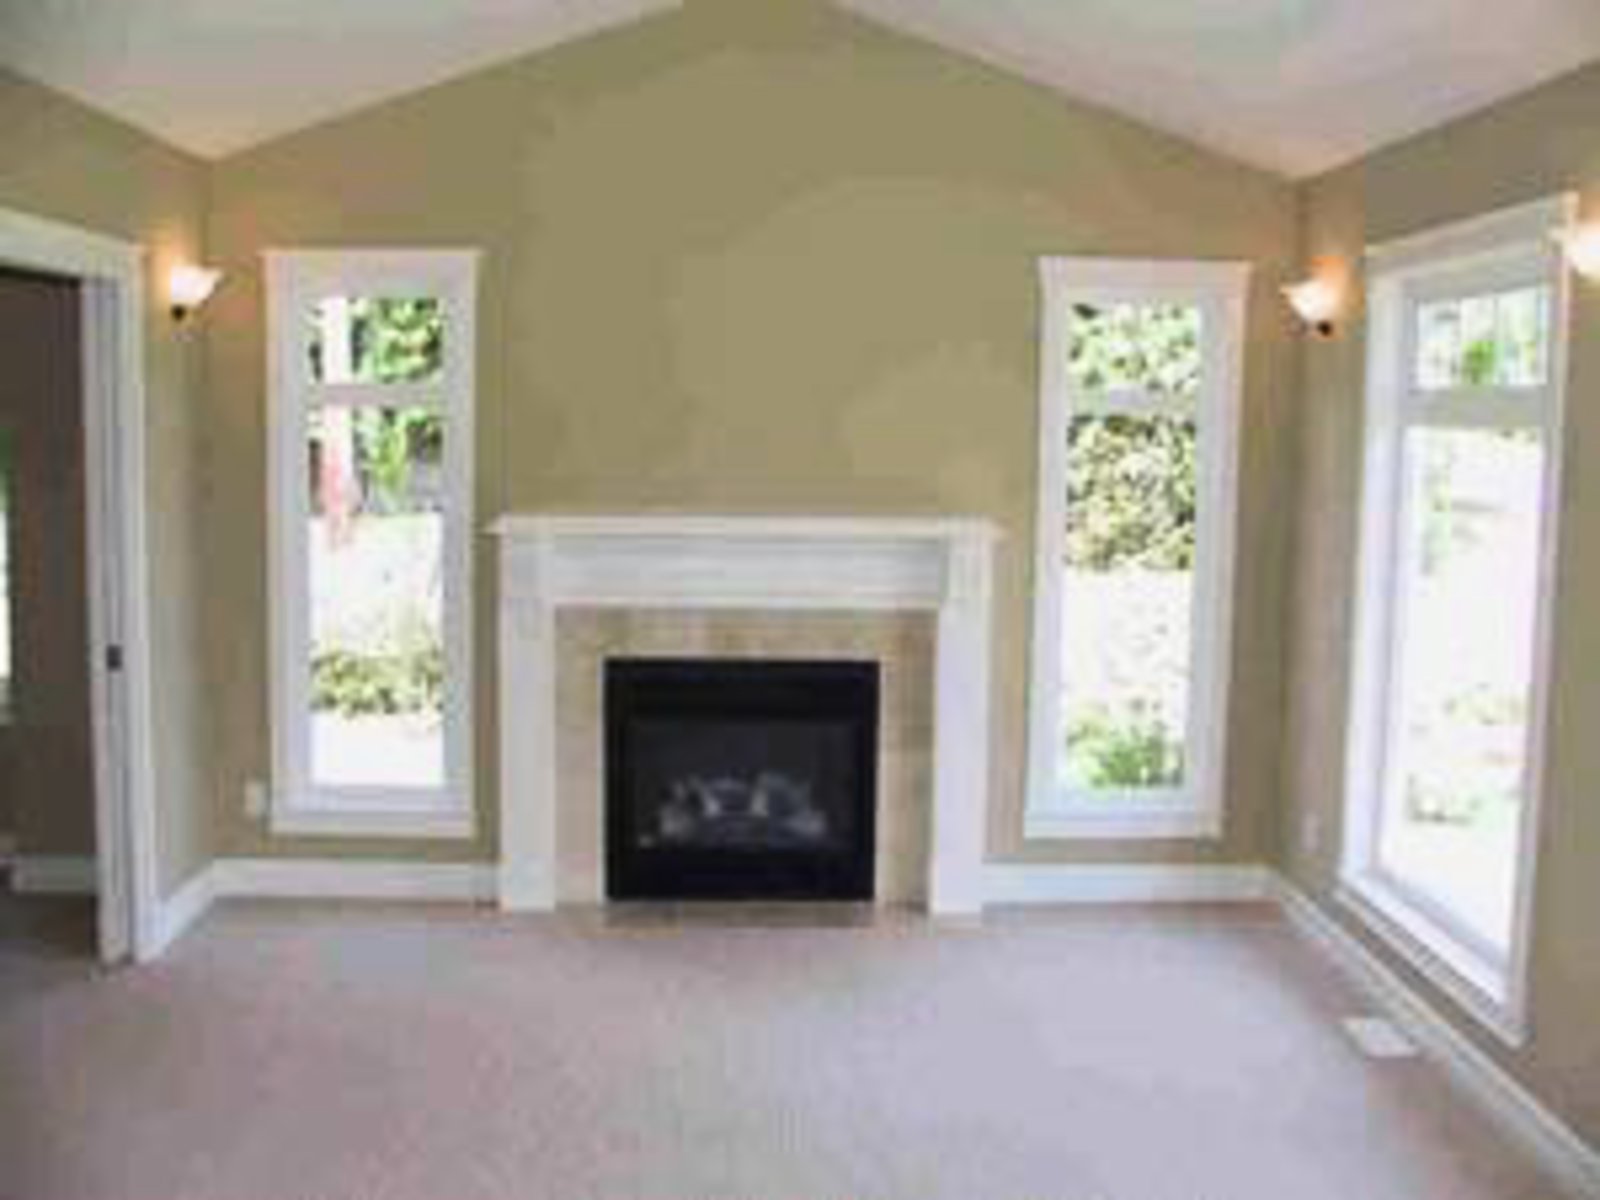 Living Room Vaulted ceiling and gas fireplace